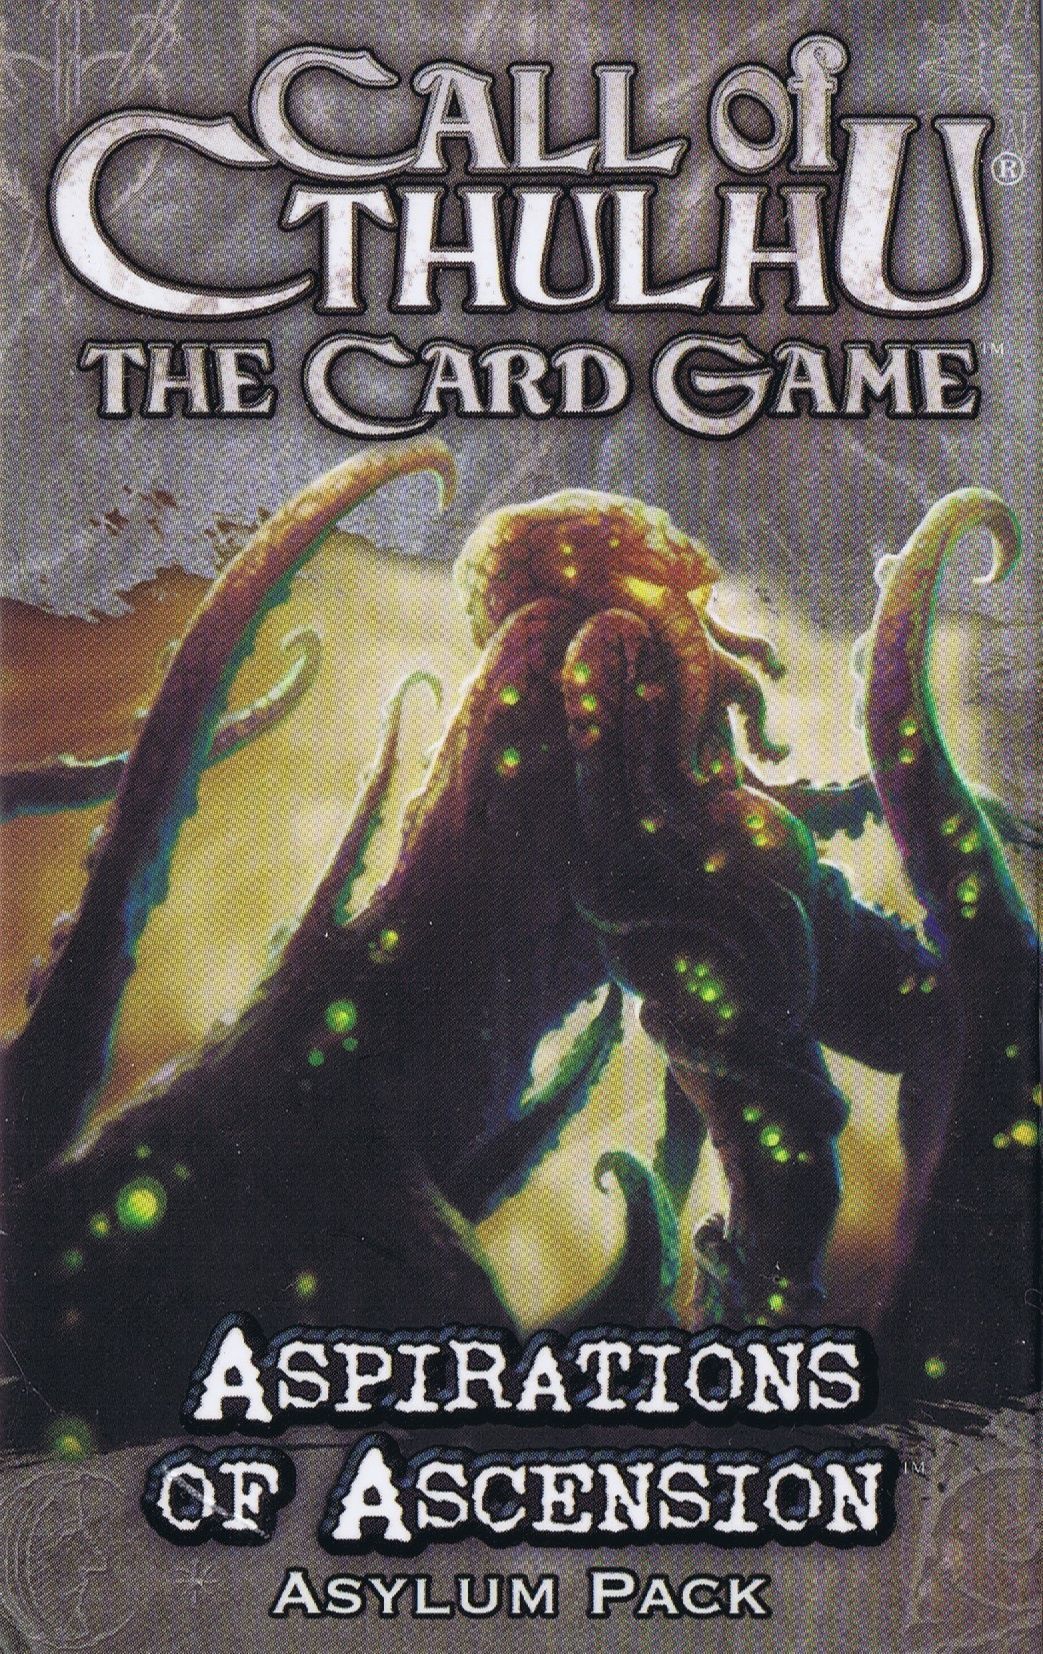 Call of Cthulhu: The Card Game – Aspirations of Ascension Asylum Pack